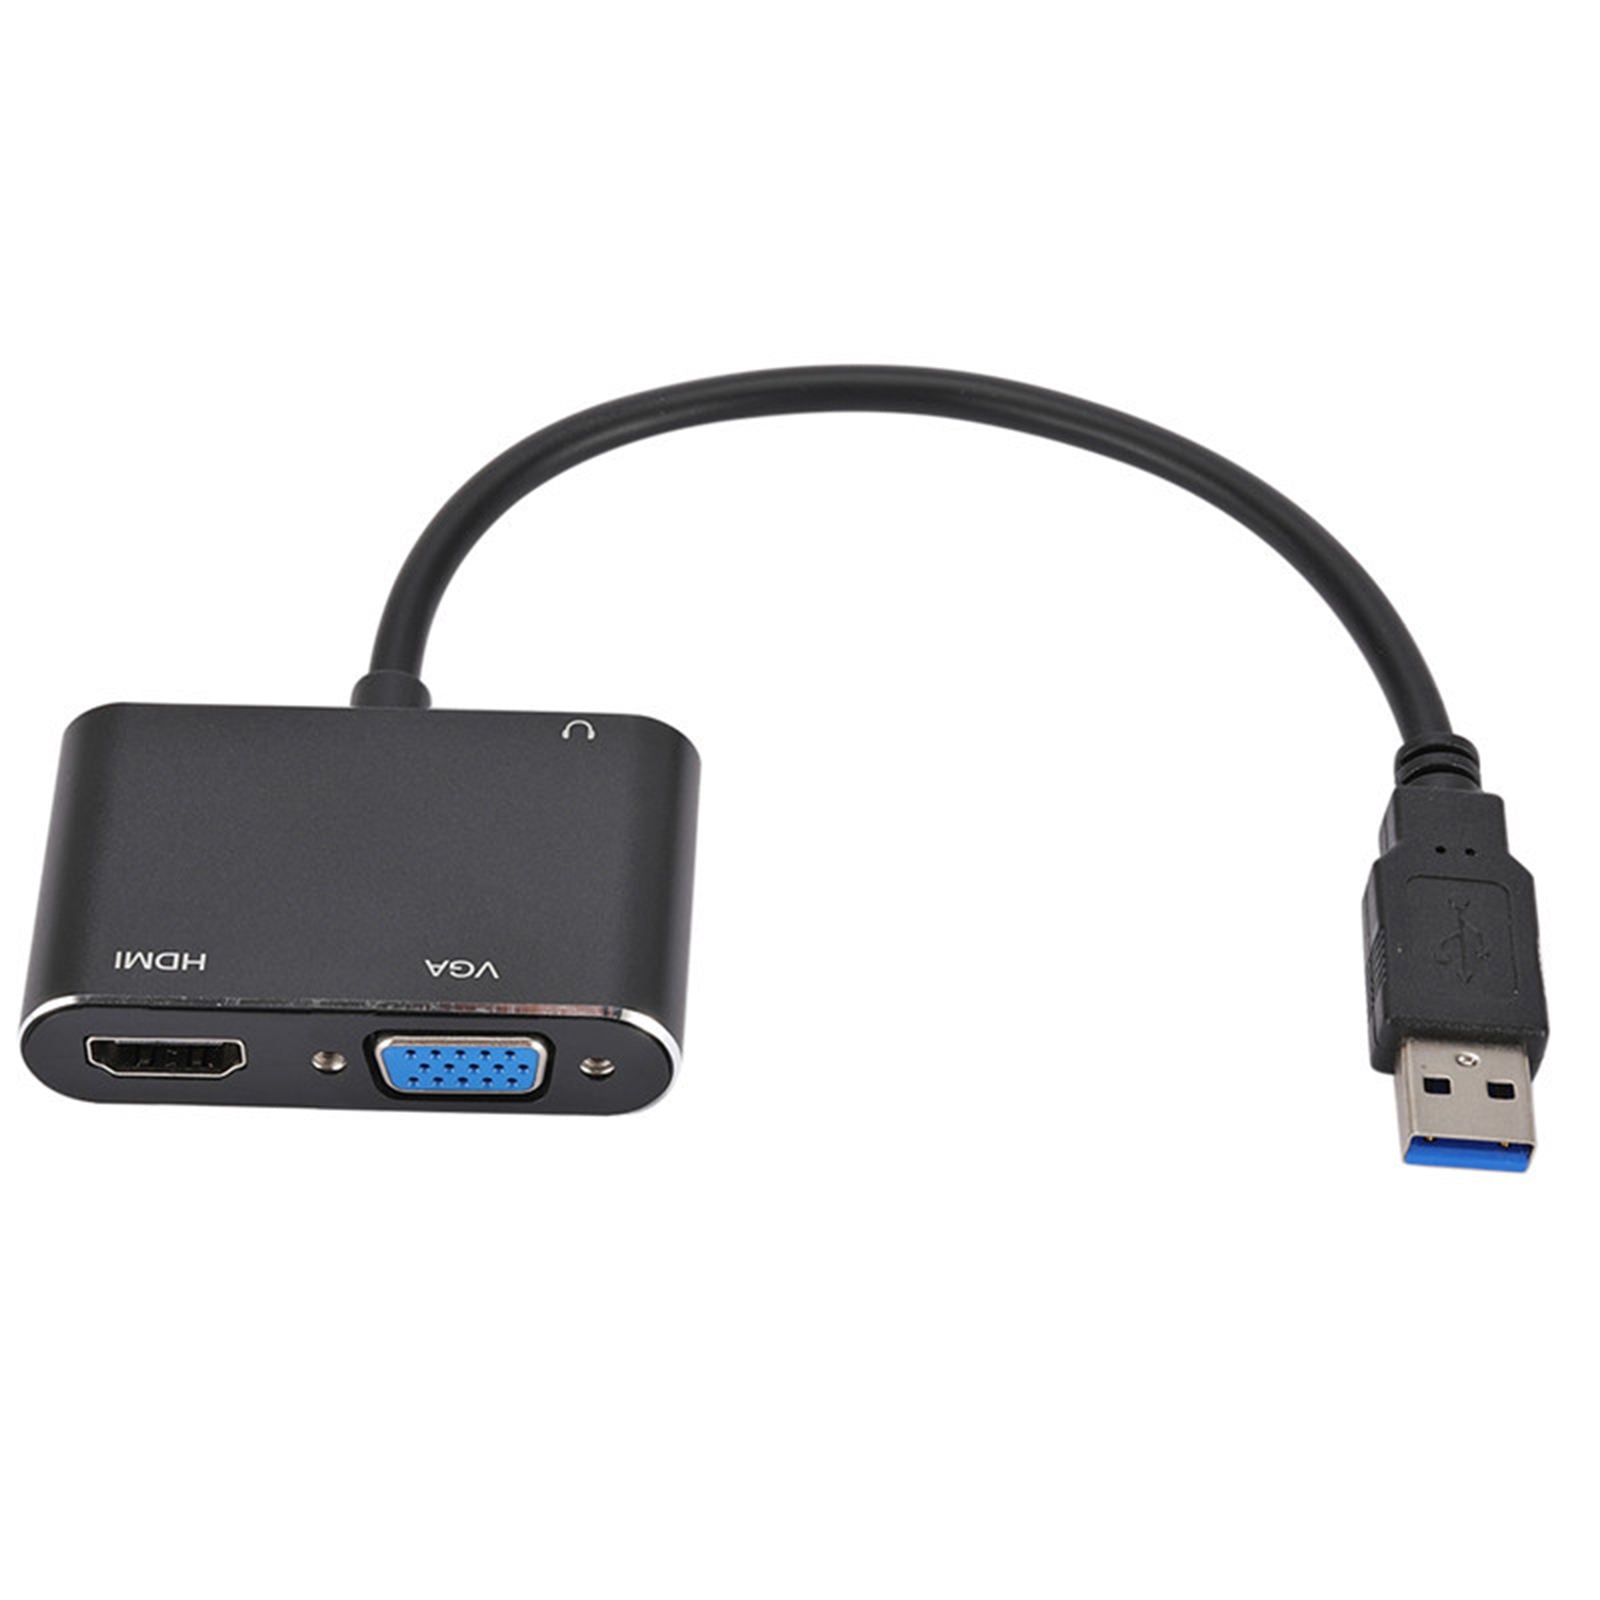 2-in-1 USB 3.0 to HDMI Adapter Converter ,Not Stuck No Glare Accessories